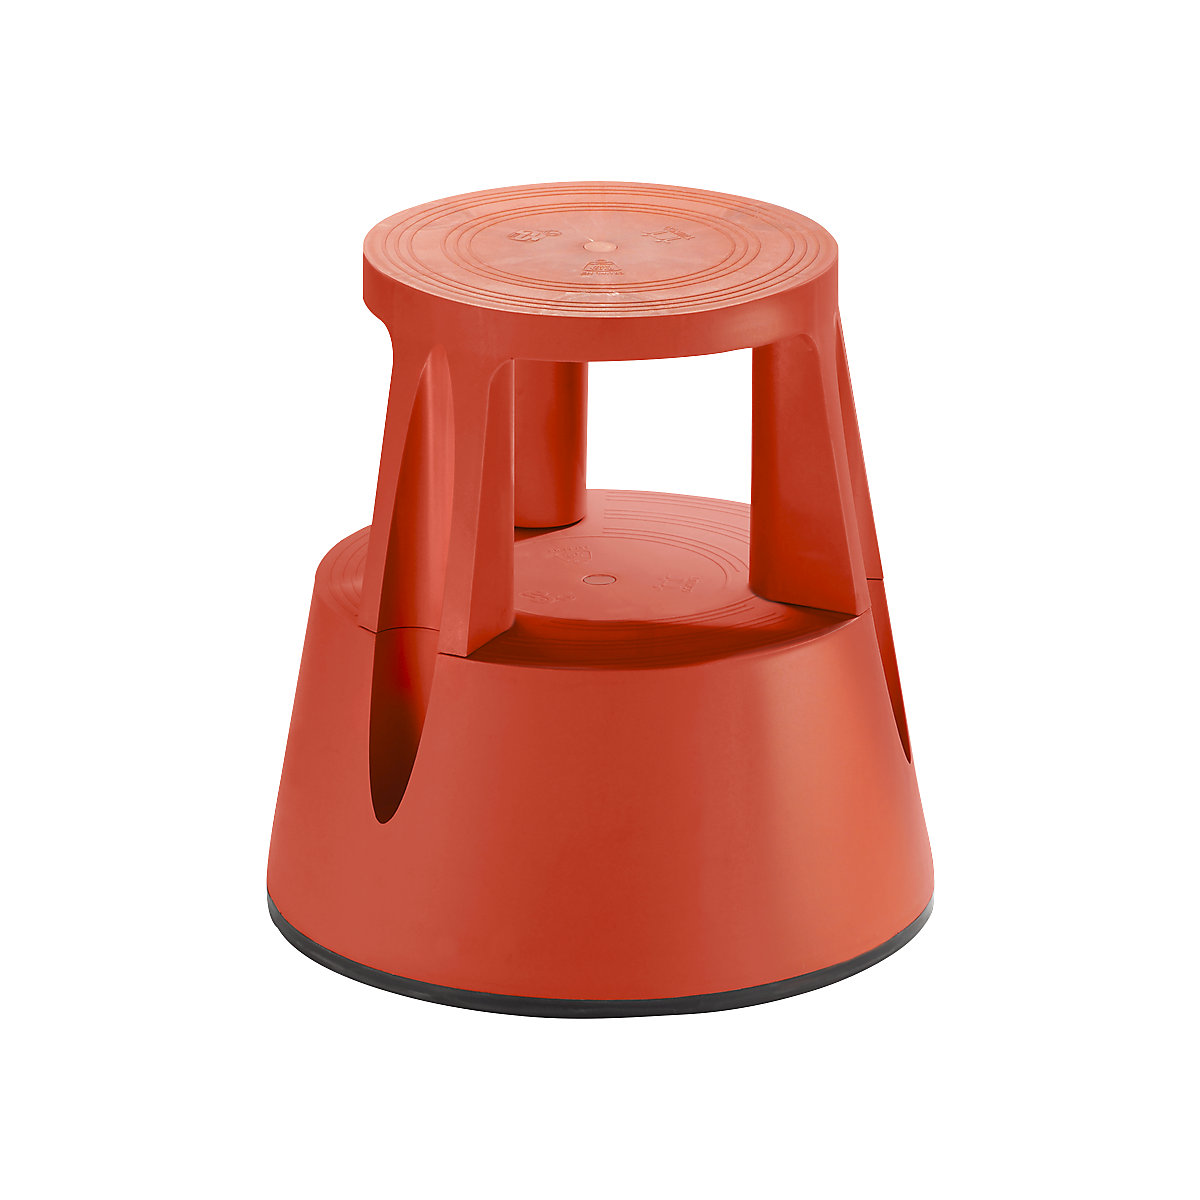 Kick stool made of shatterproof plastic – Twinco, max. load 150 kg, red, 3+ items-6